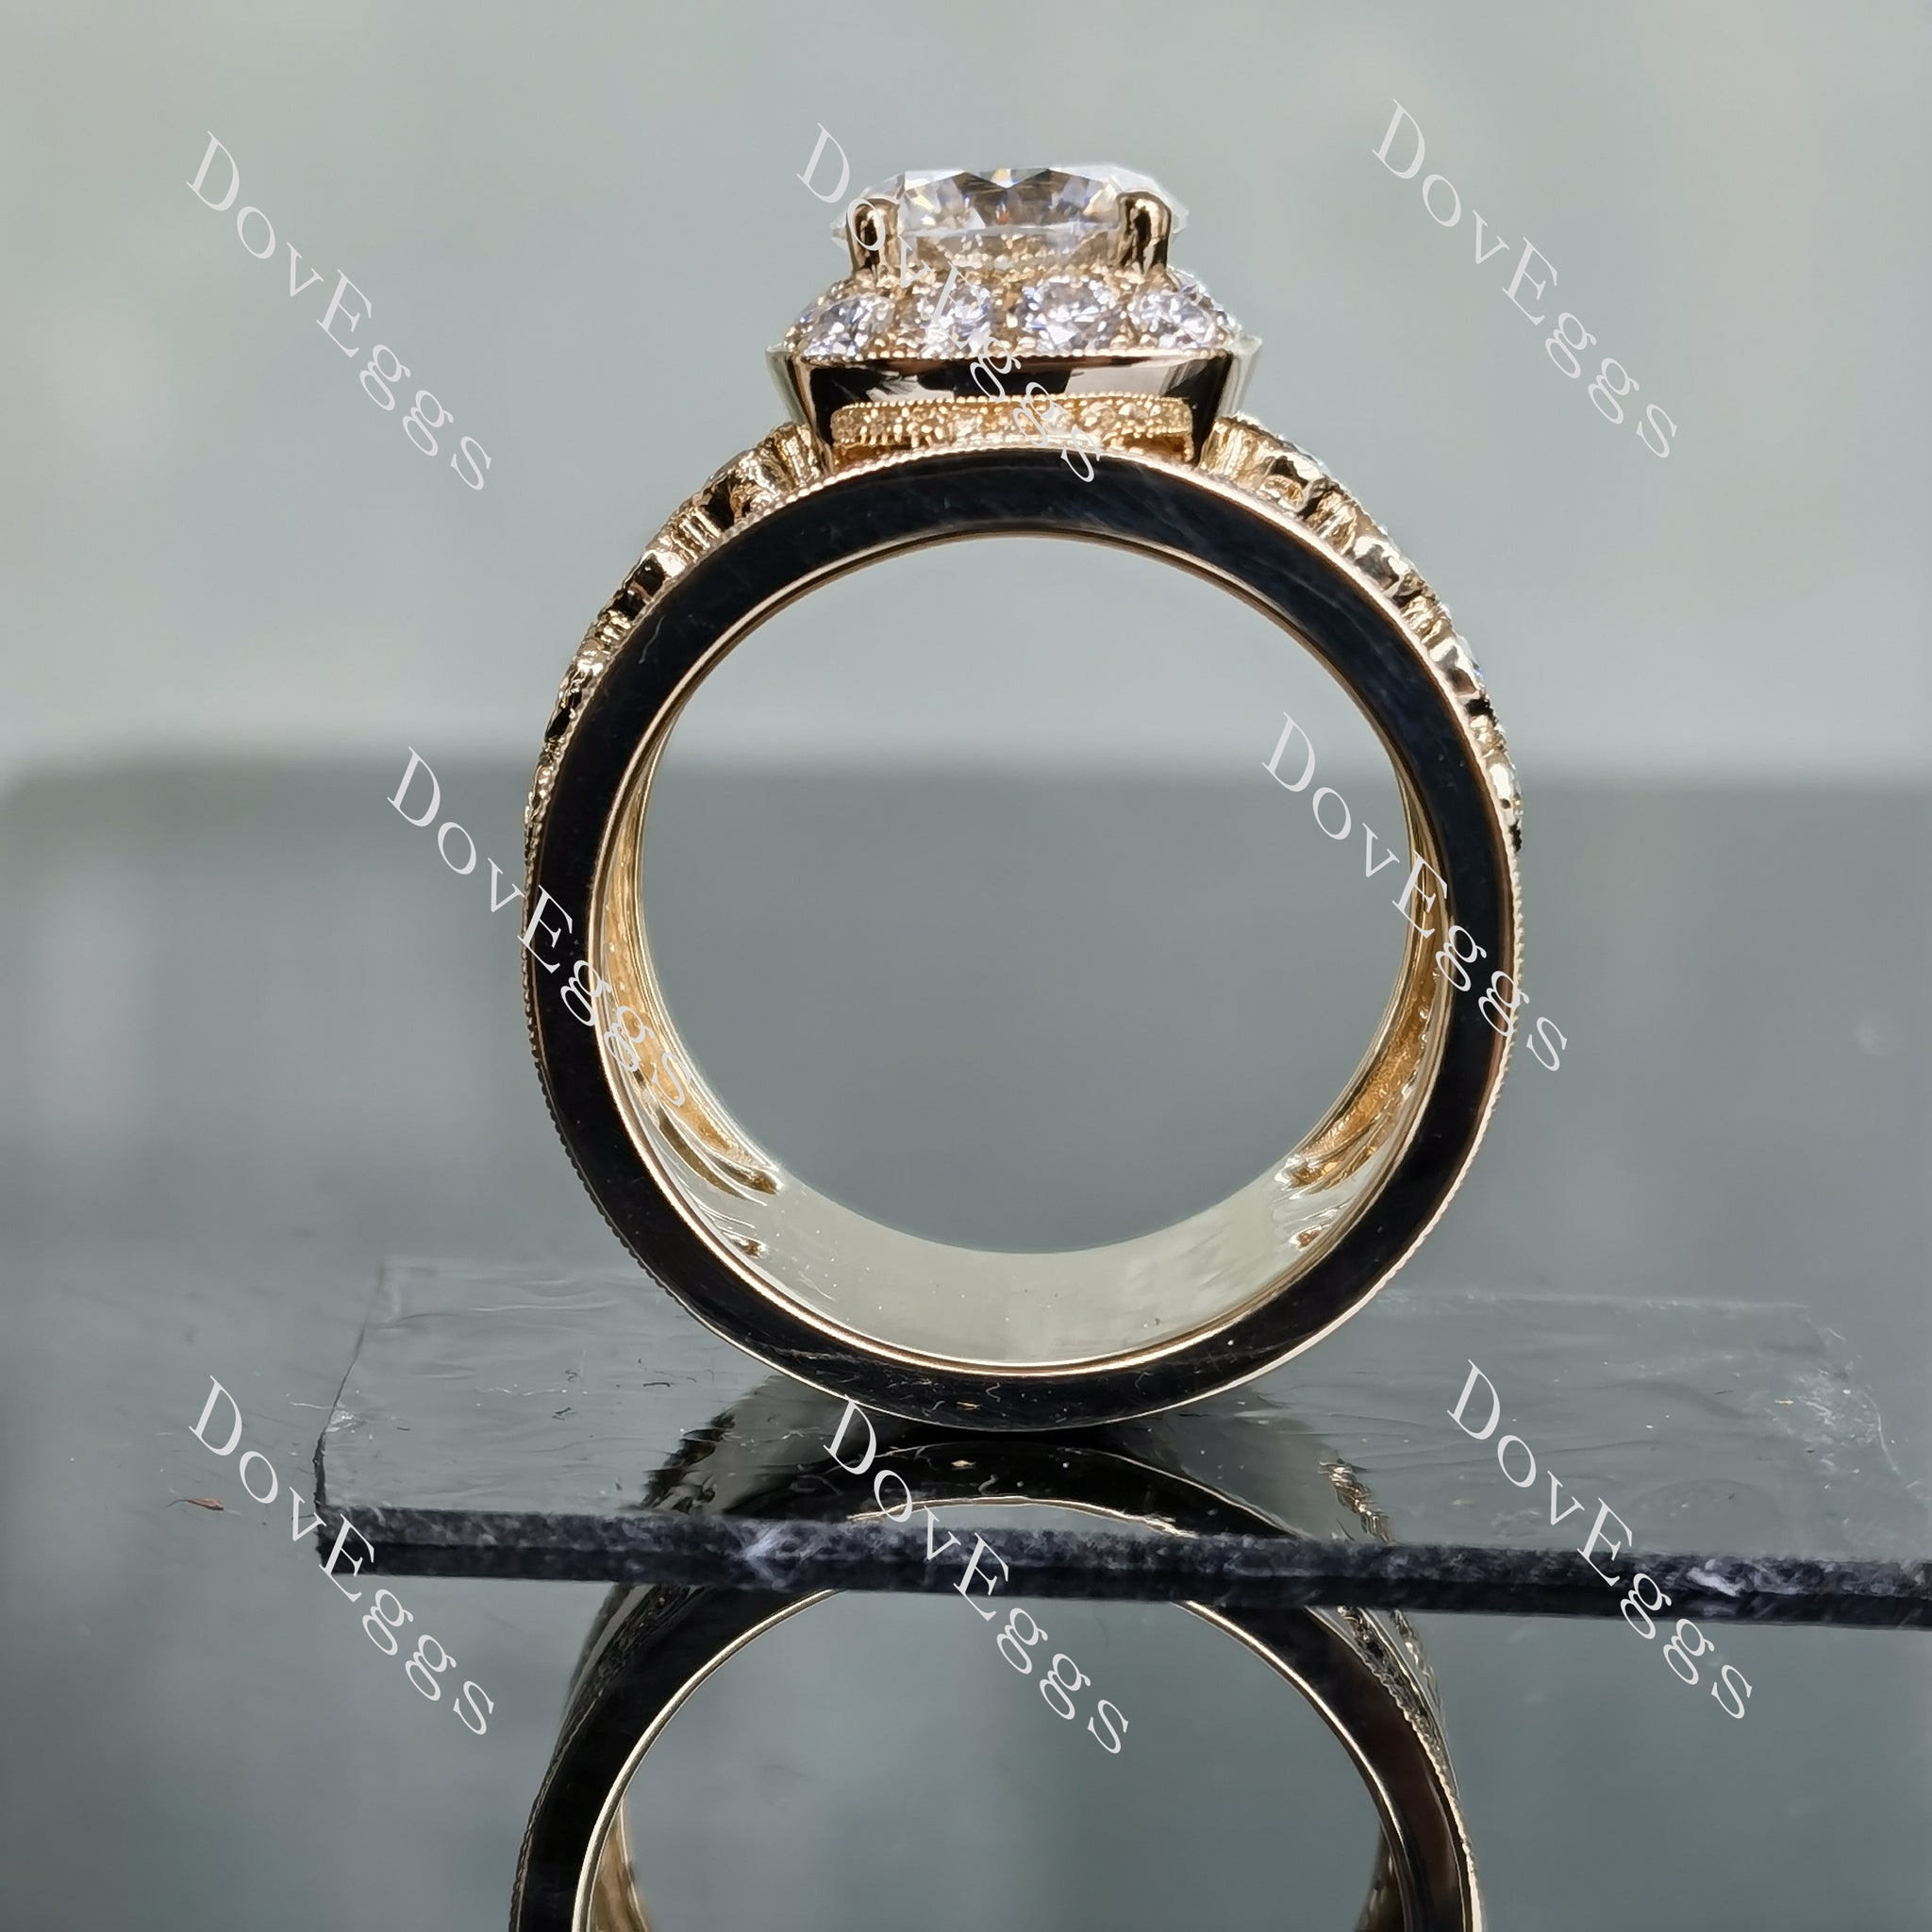 Amor Eterno round halo pave vintage wide band moissanite engagement ring